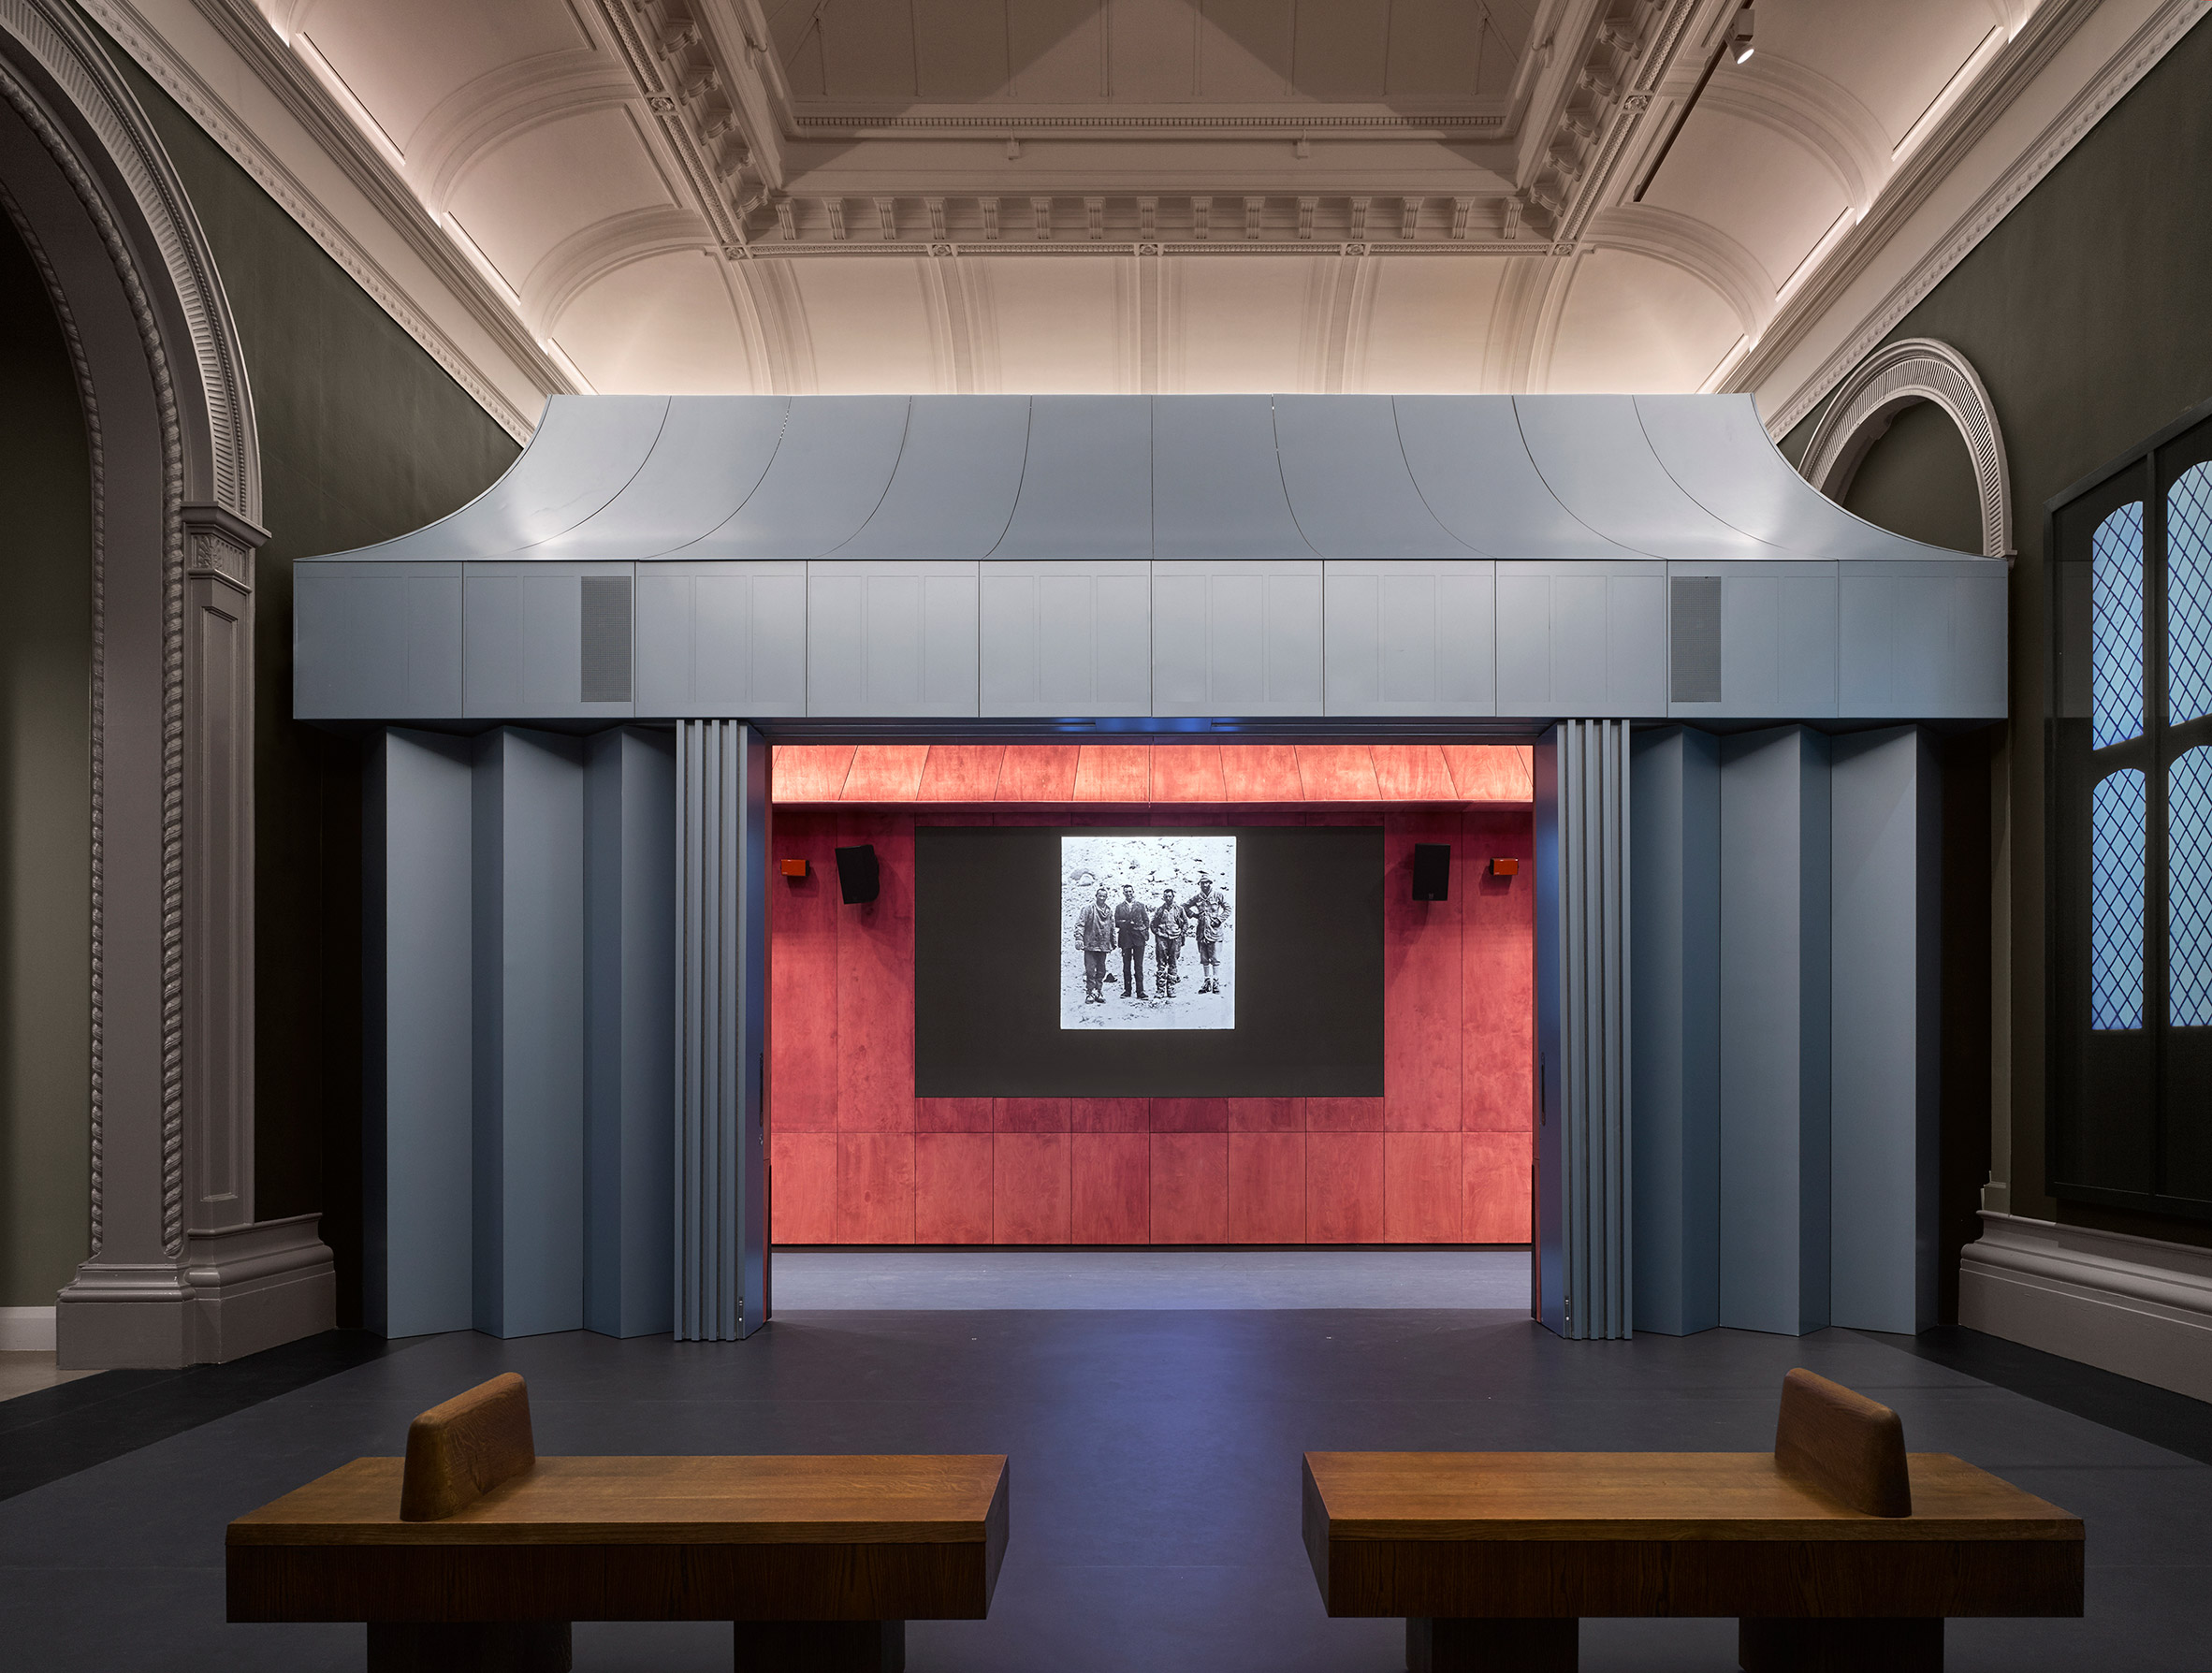 David Kohn designs V&A Photography Centre to hold museum's delicate collection